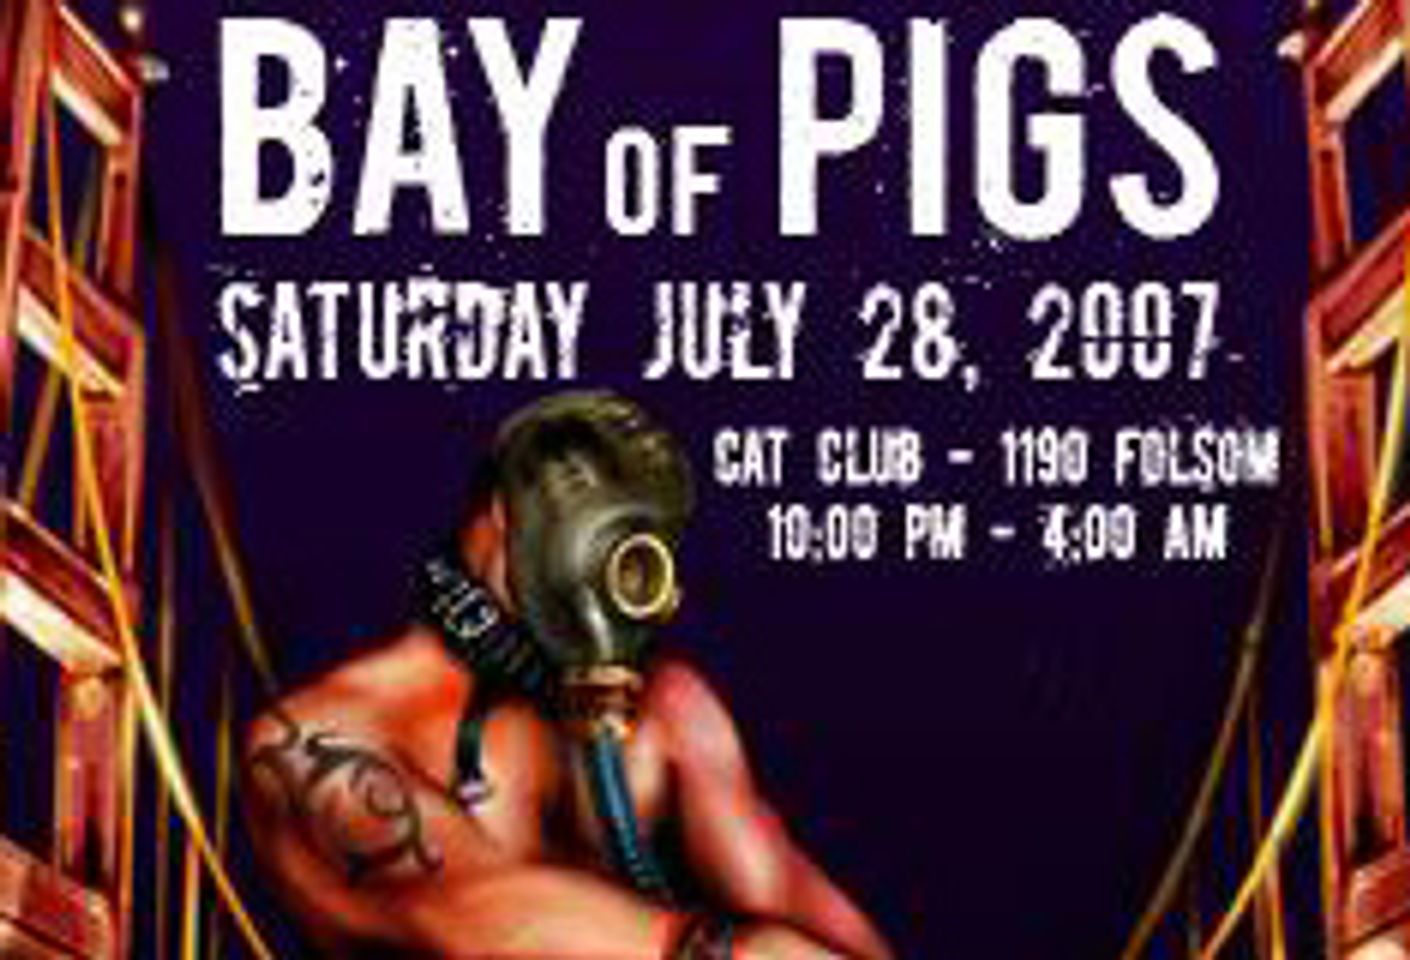 Titan Sponsors Bay of Pigs & Up Your Alley